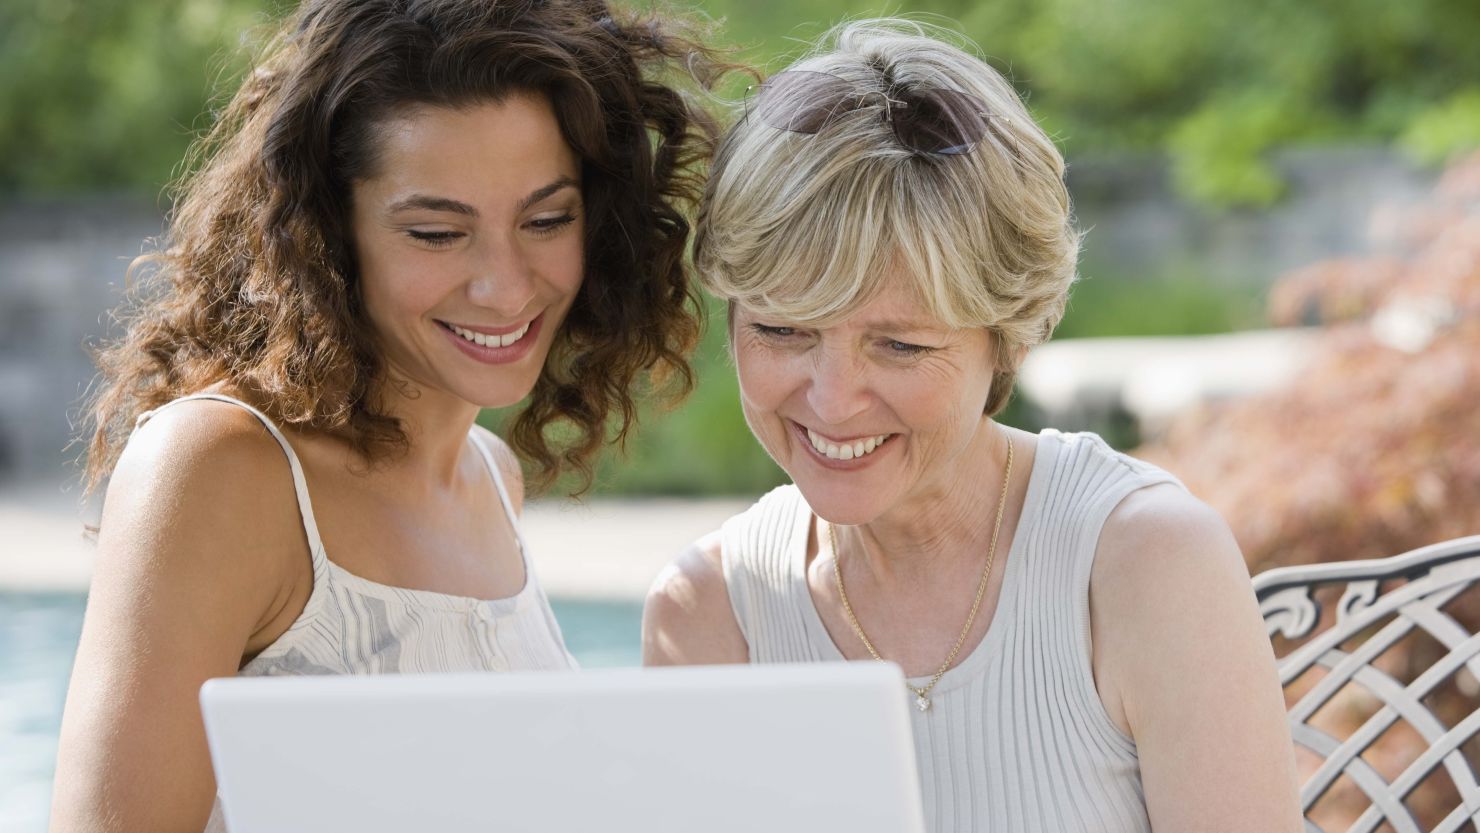 Adult children can help Boomer parents with online dating, which the millennial generation has grown up doing.